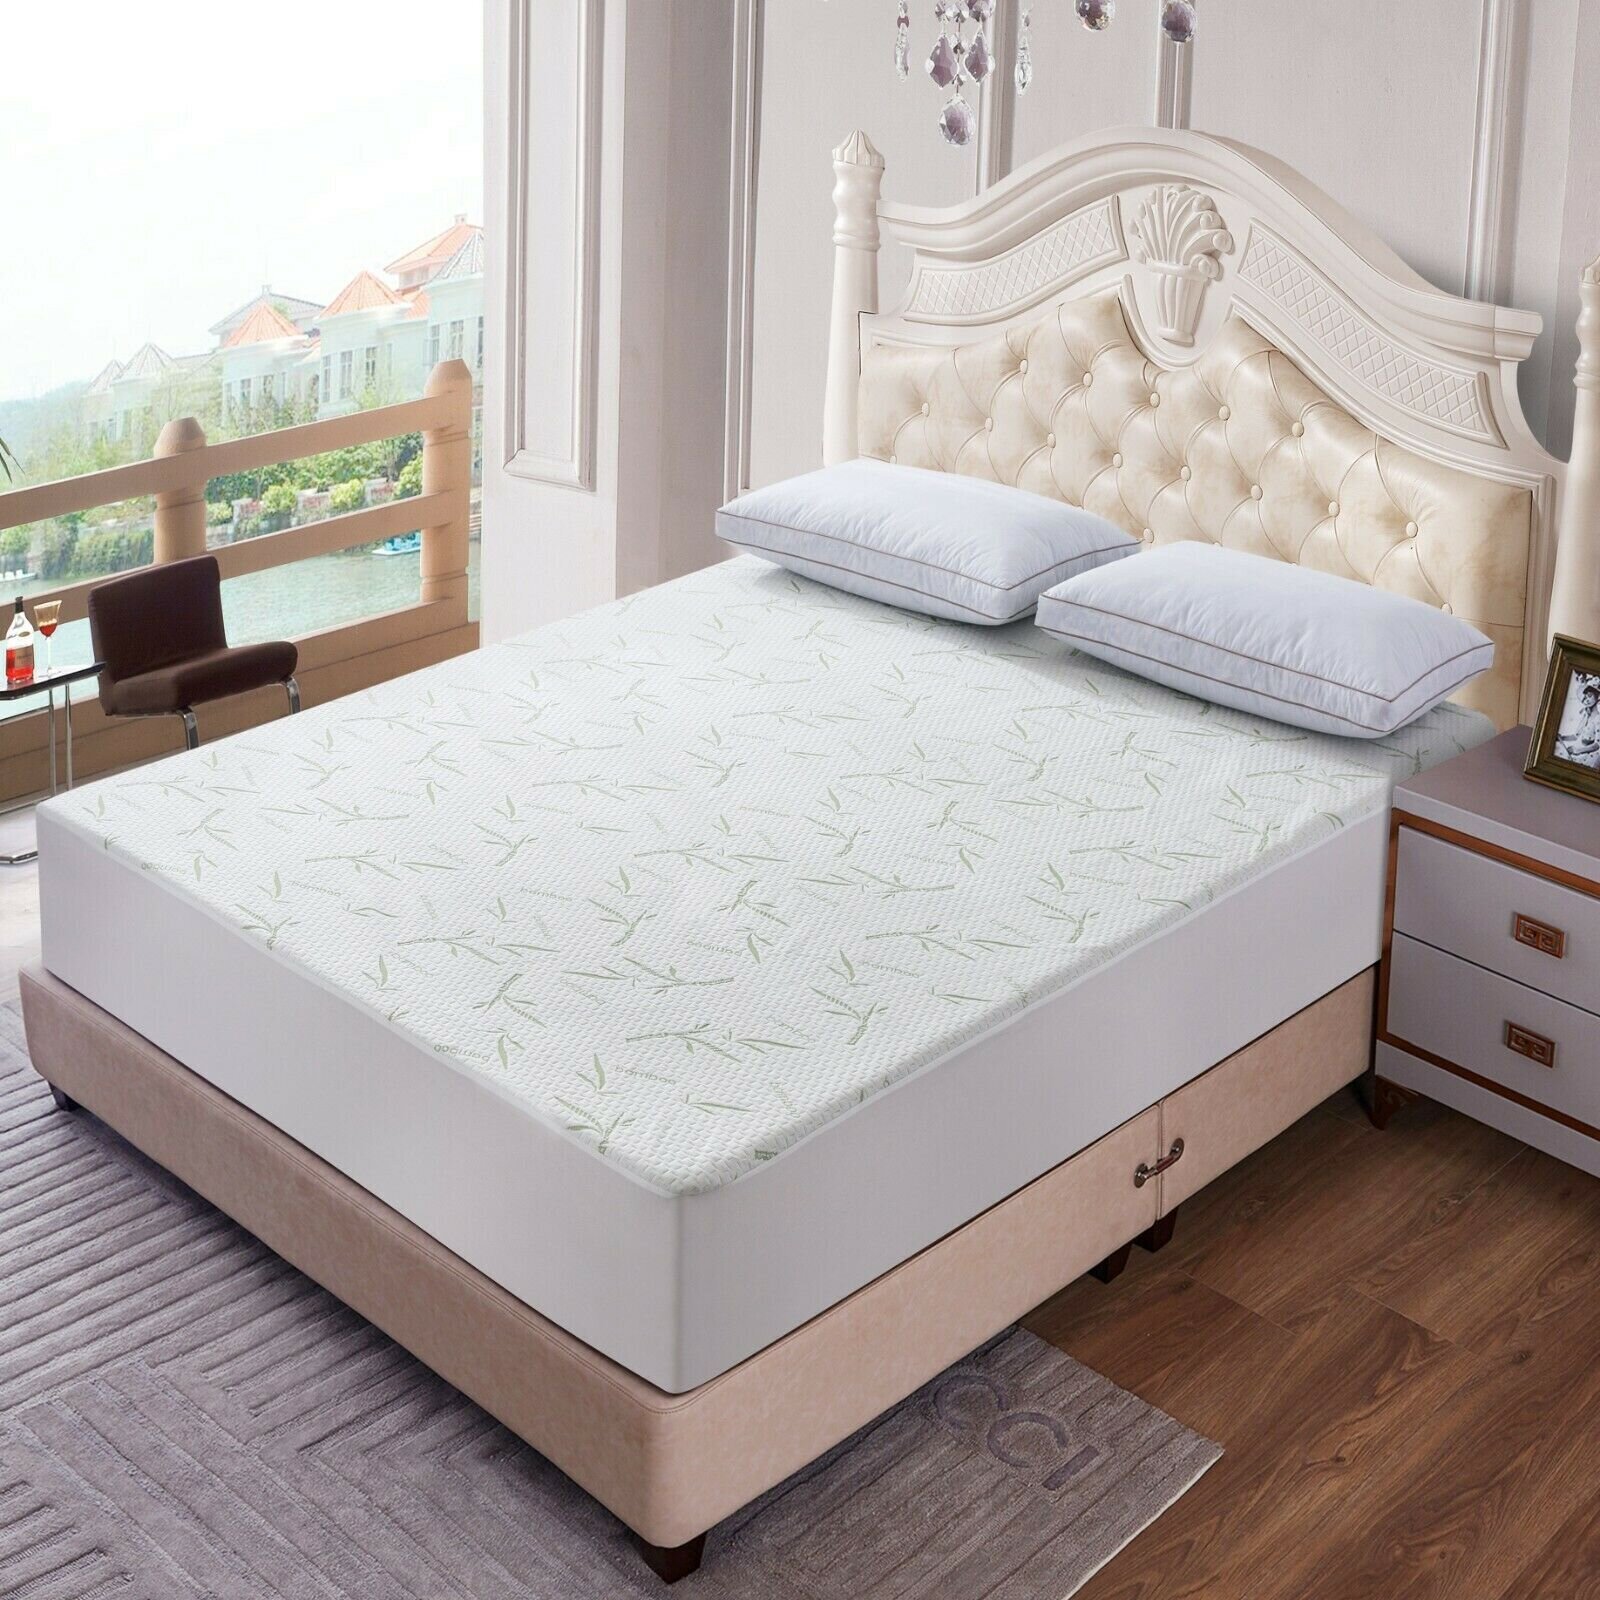 Bamboo Hypoallergenic Matress Protector Breathable Waterproof Bed Mattress Case 